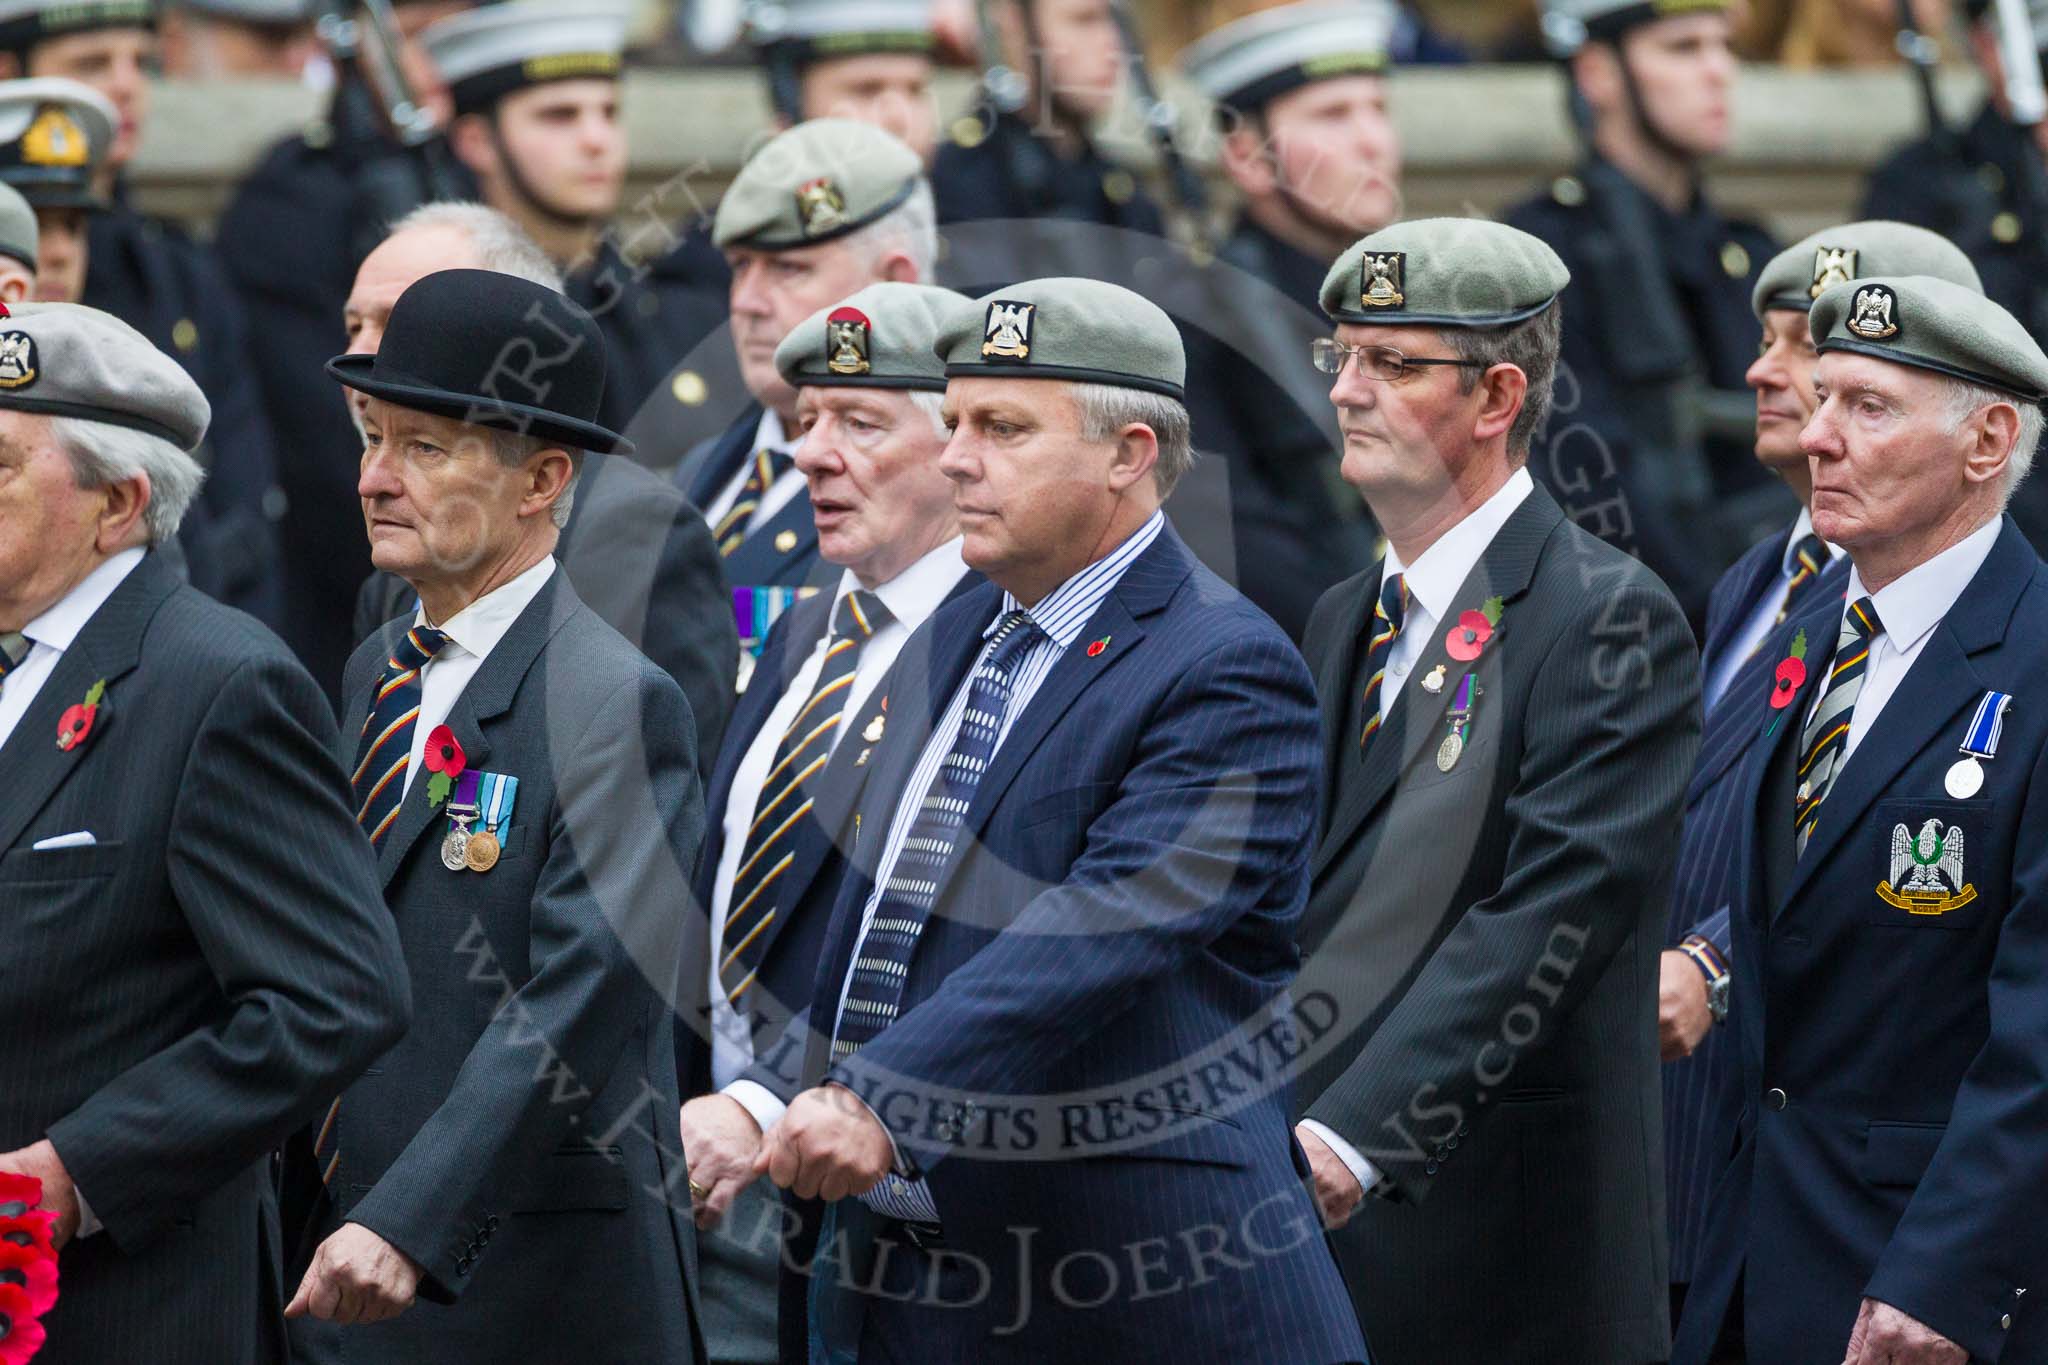 Remembrance Sunday at the Cenotaph 2015: Group B22, Royal Scots Dragoon Guards.
Cenotaph, Whitehall, London SW1,
London,
Greater London,
United Kingdom,
on 08 November 2015 at 11:40, image #172